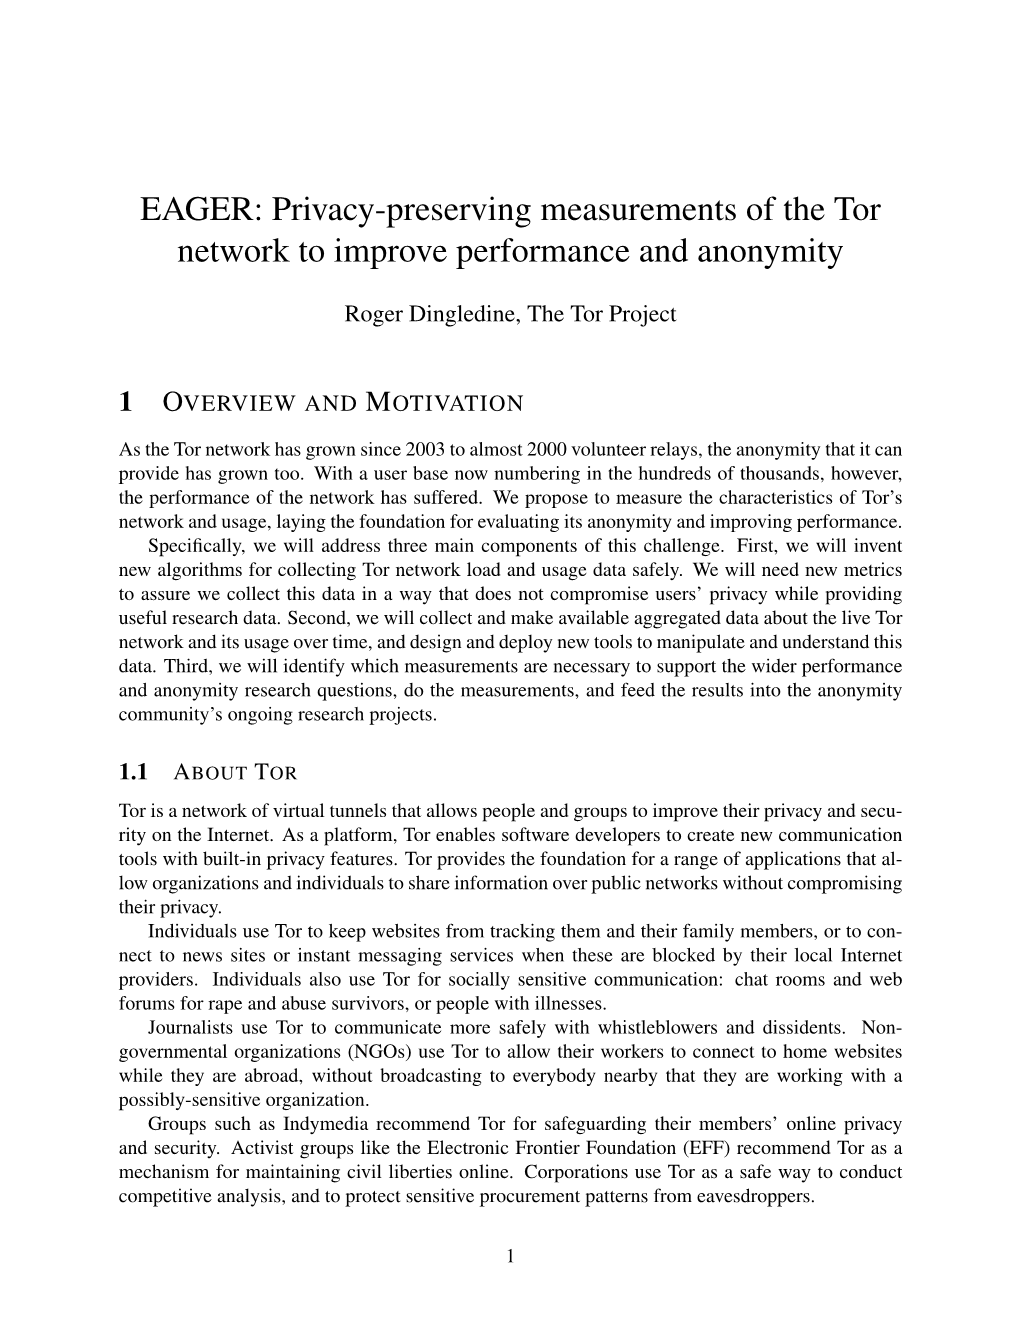 Privacy-Preserving Measurements of the Tor Network to Improve Performance and Anonymity